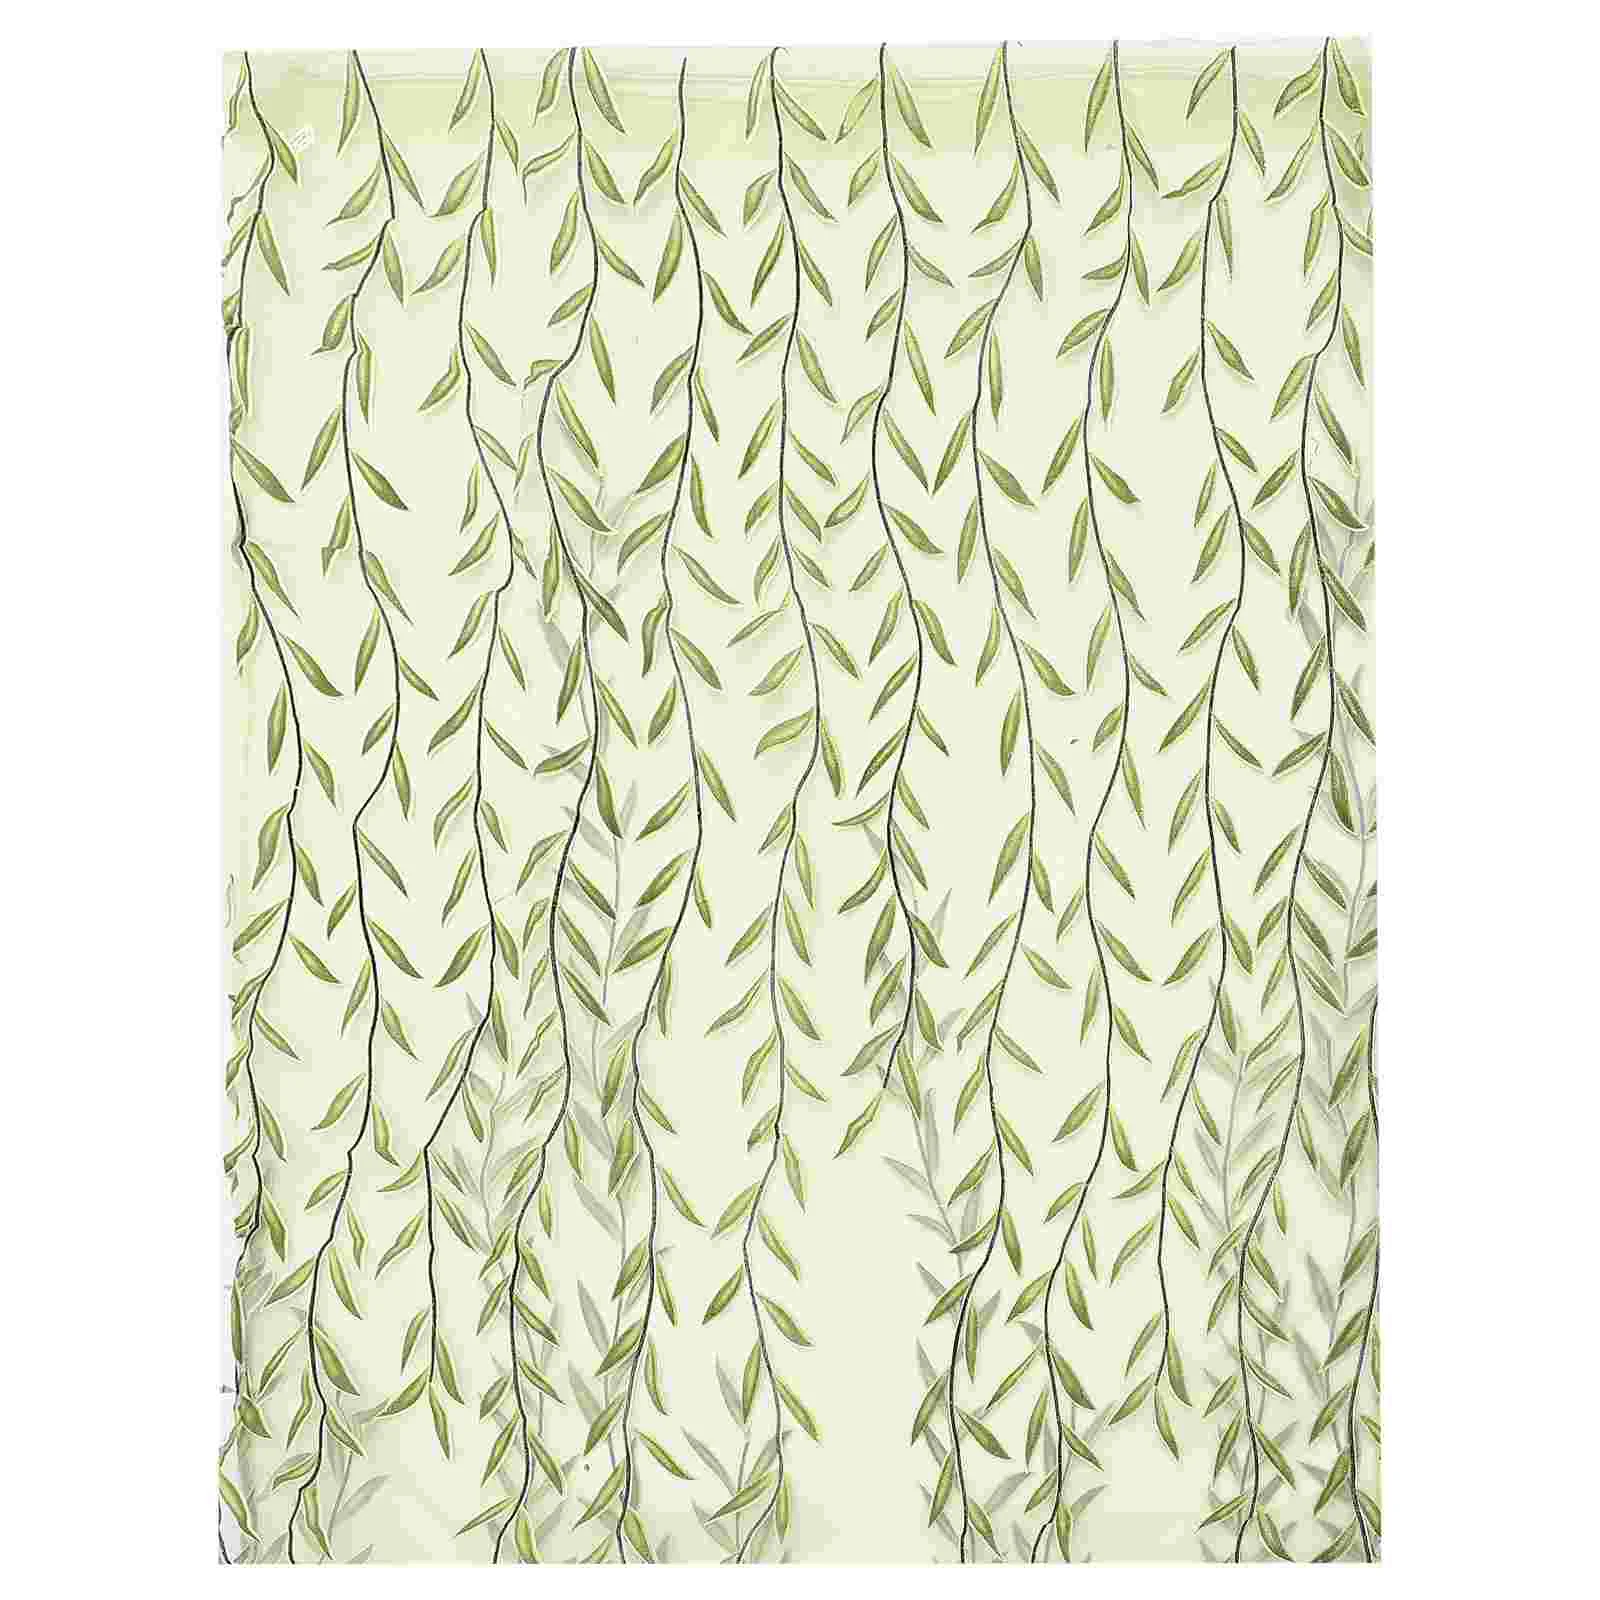 

Curtain Window Curtains Voile Sheer Tulle Willow Panel Leaf Drapes Transparent Green Embroidered Screen Sheers Room Panels